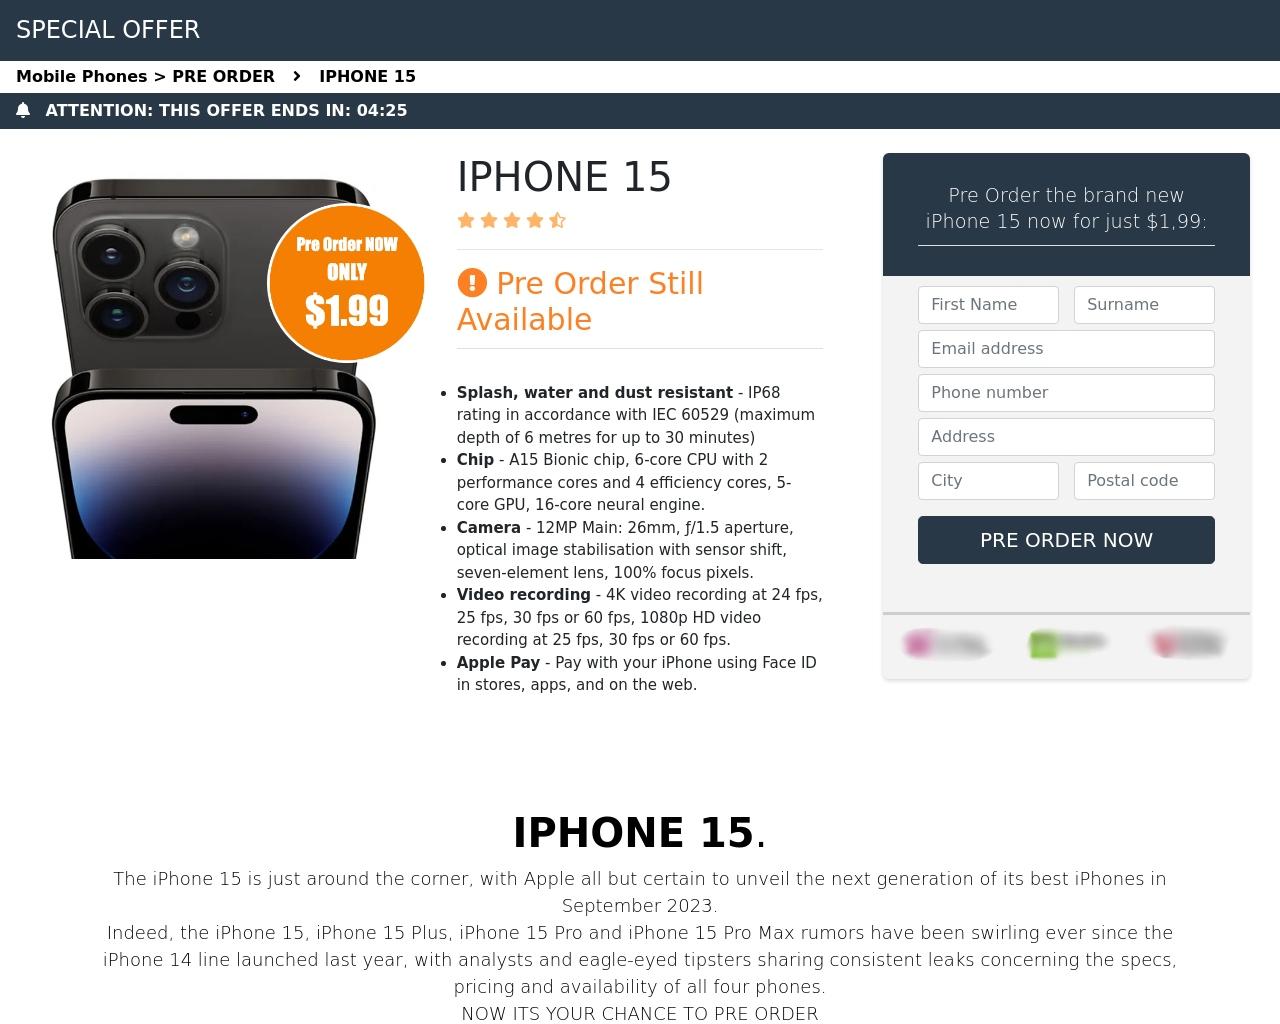 An example of a phishing page offering iPhone 15 pre-order